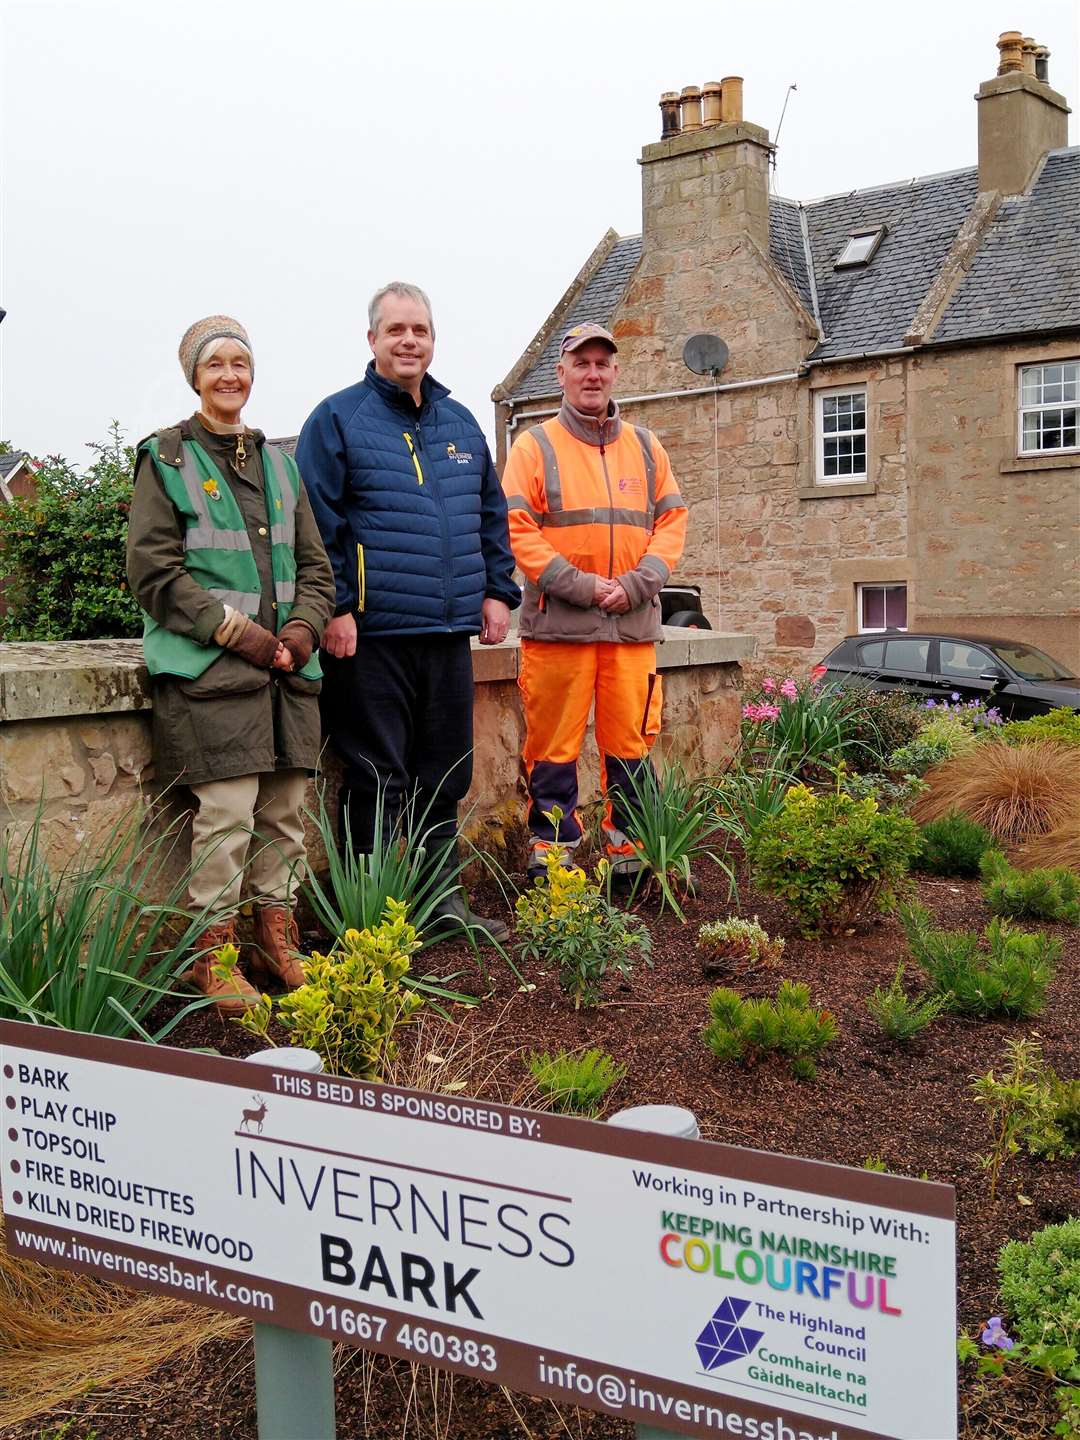 Annie Stewart from KNC with Alex Wilson, Director of Inverness Bark, (centre) and Wayne Stewart of Highland Council.